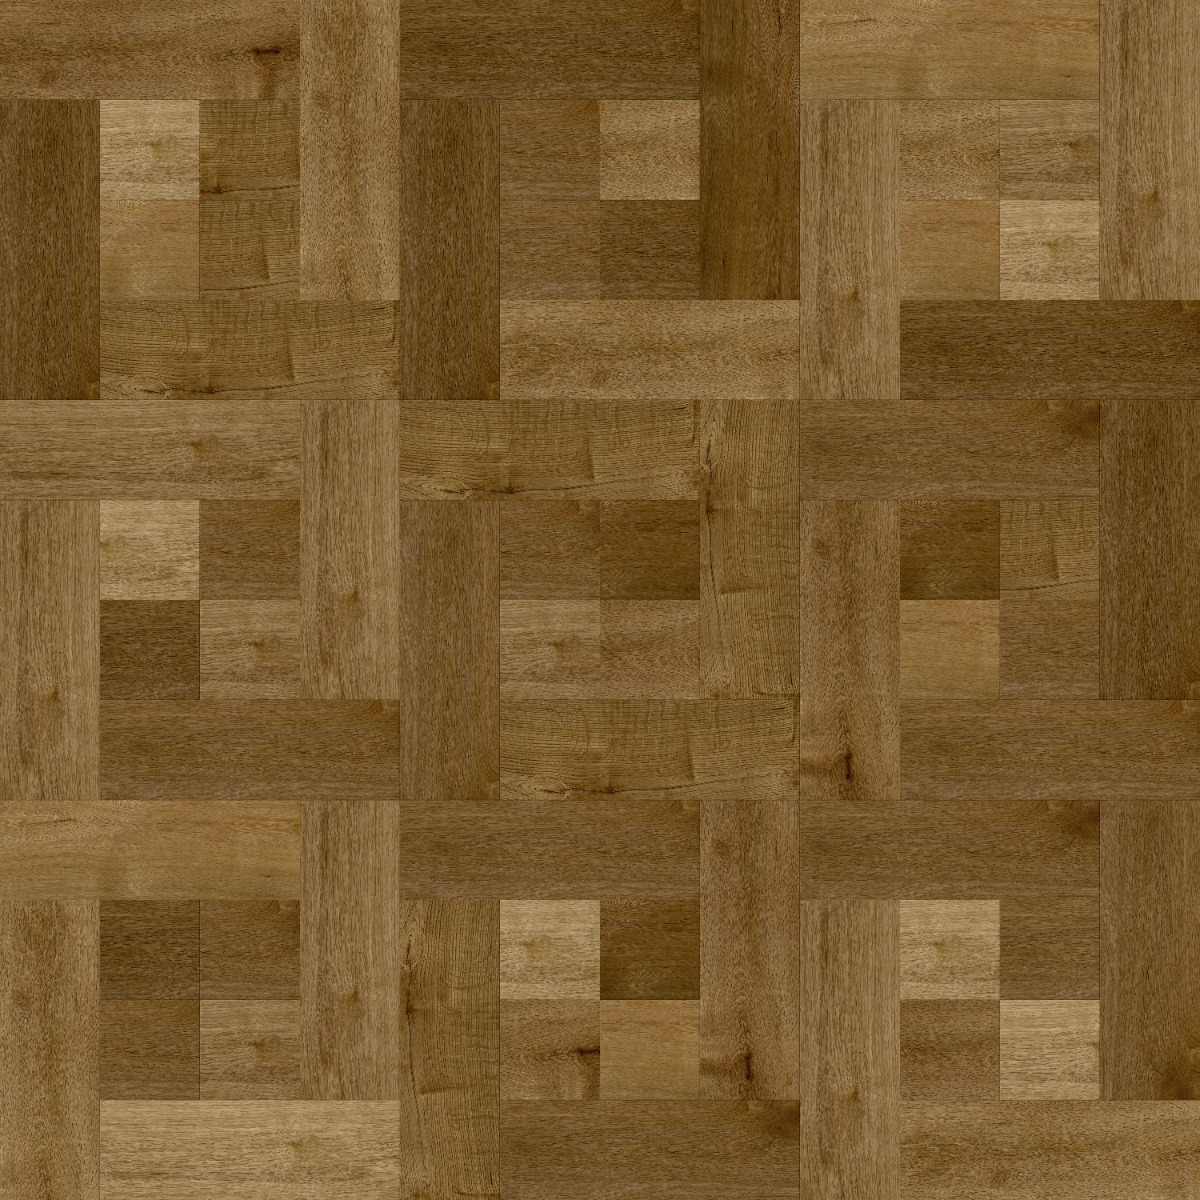 A seamless wood texture with benchmark 3040 boards arranged in a Haddon Hall pattern